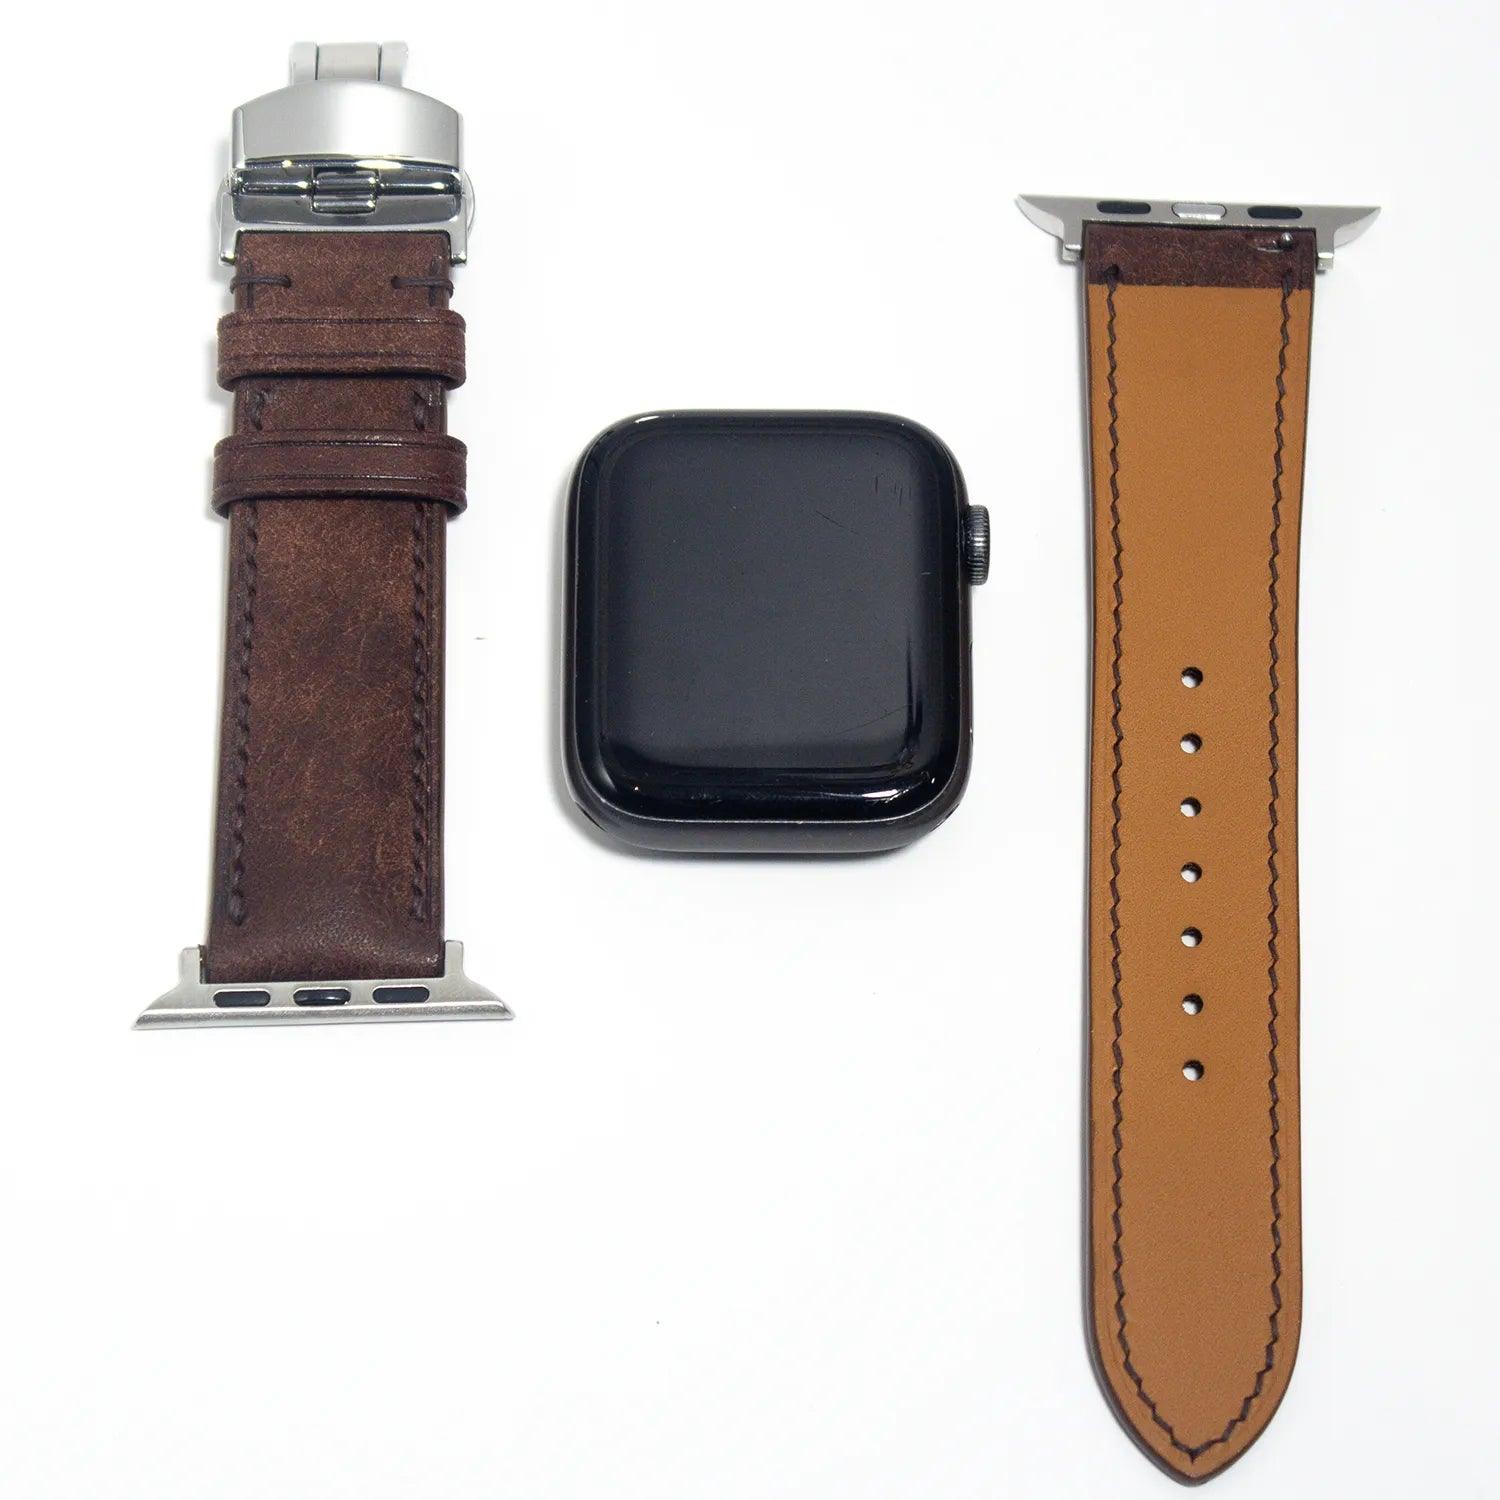 Durable leather watch straps crafted in Italian brown Pueblo leather, epitomizing artisanal elegance and sophistication.